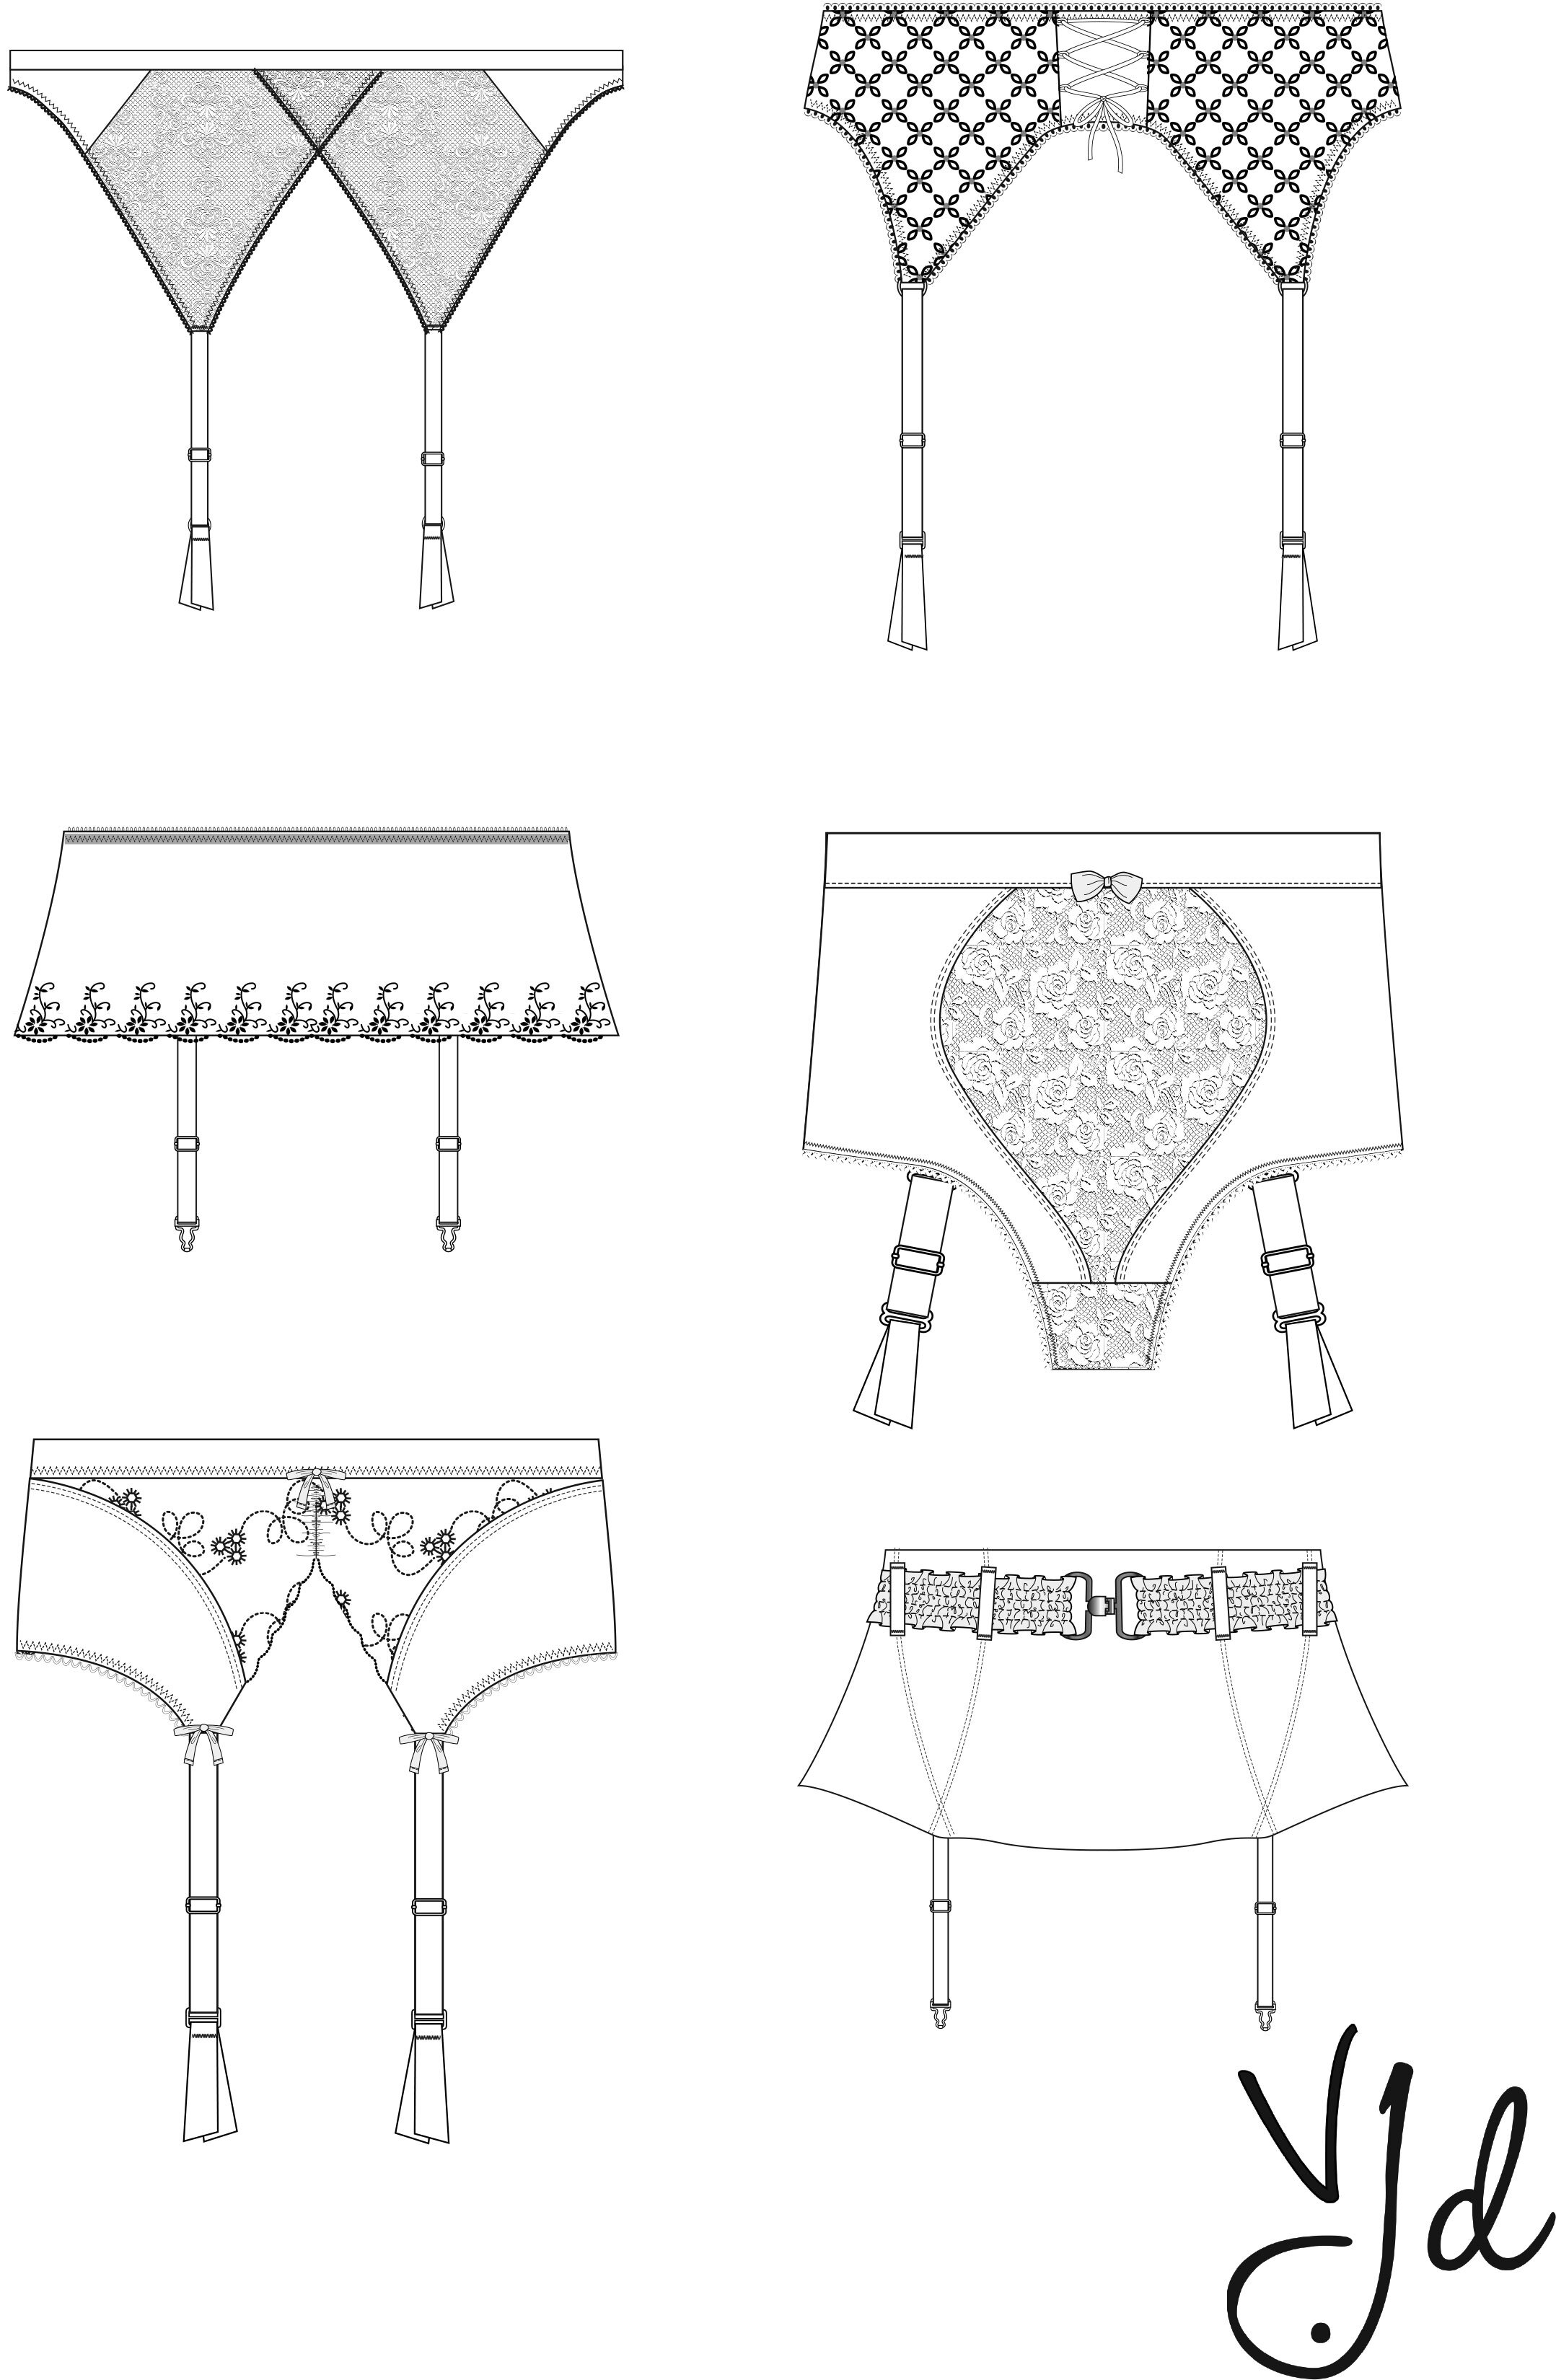 New product: six technical drawings of suspender belts — Van